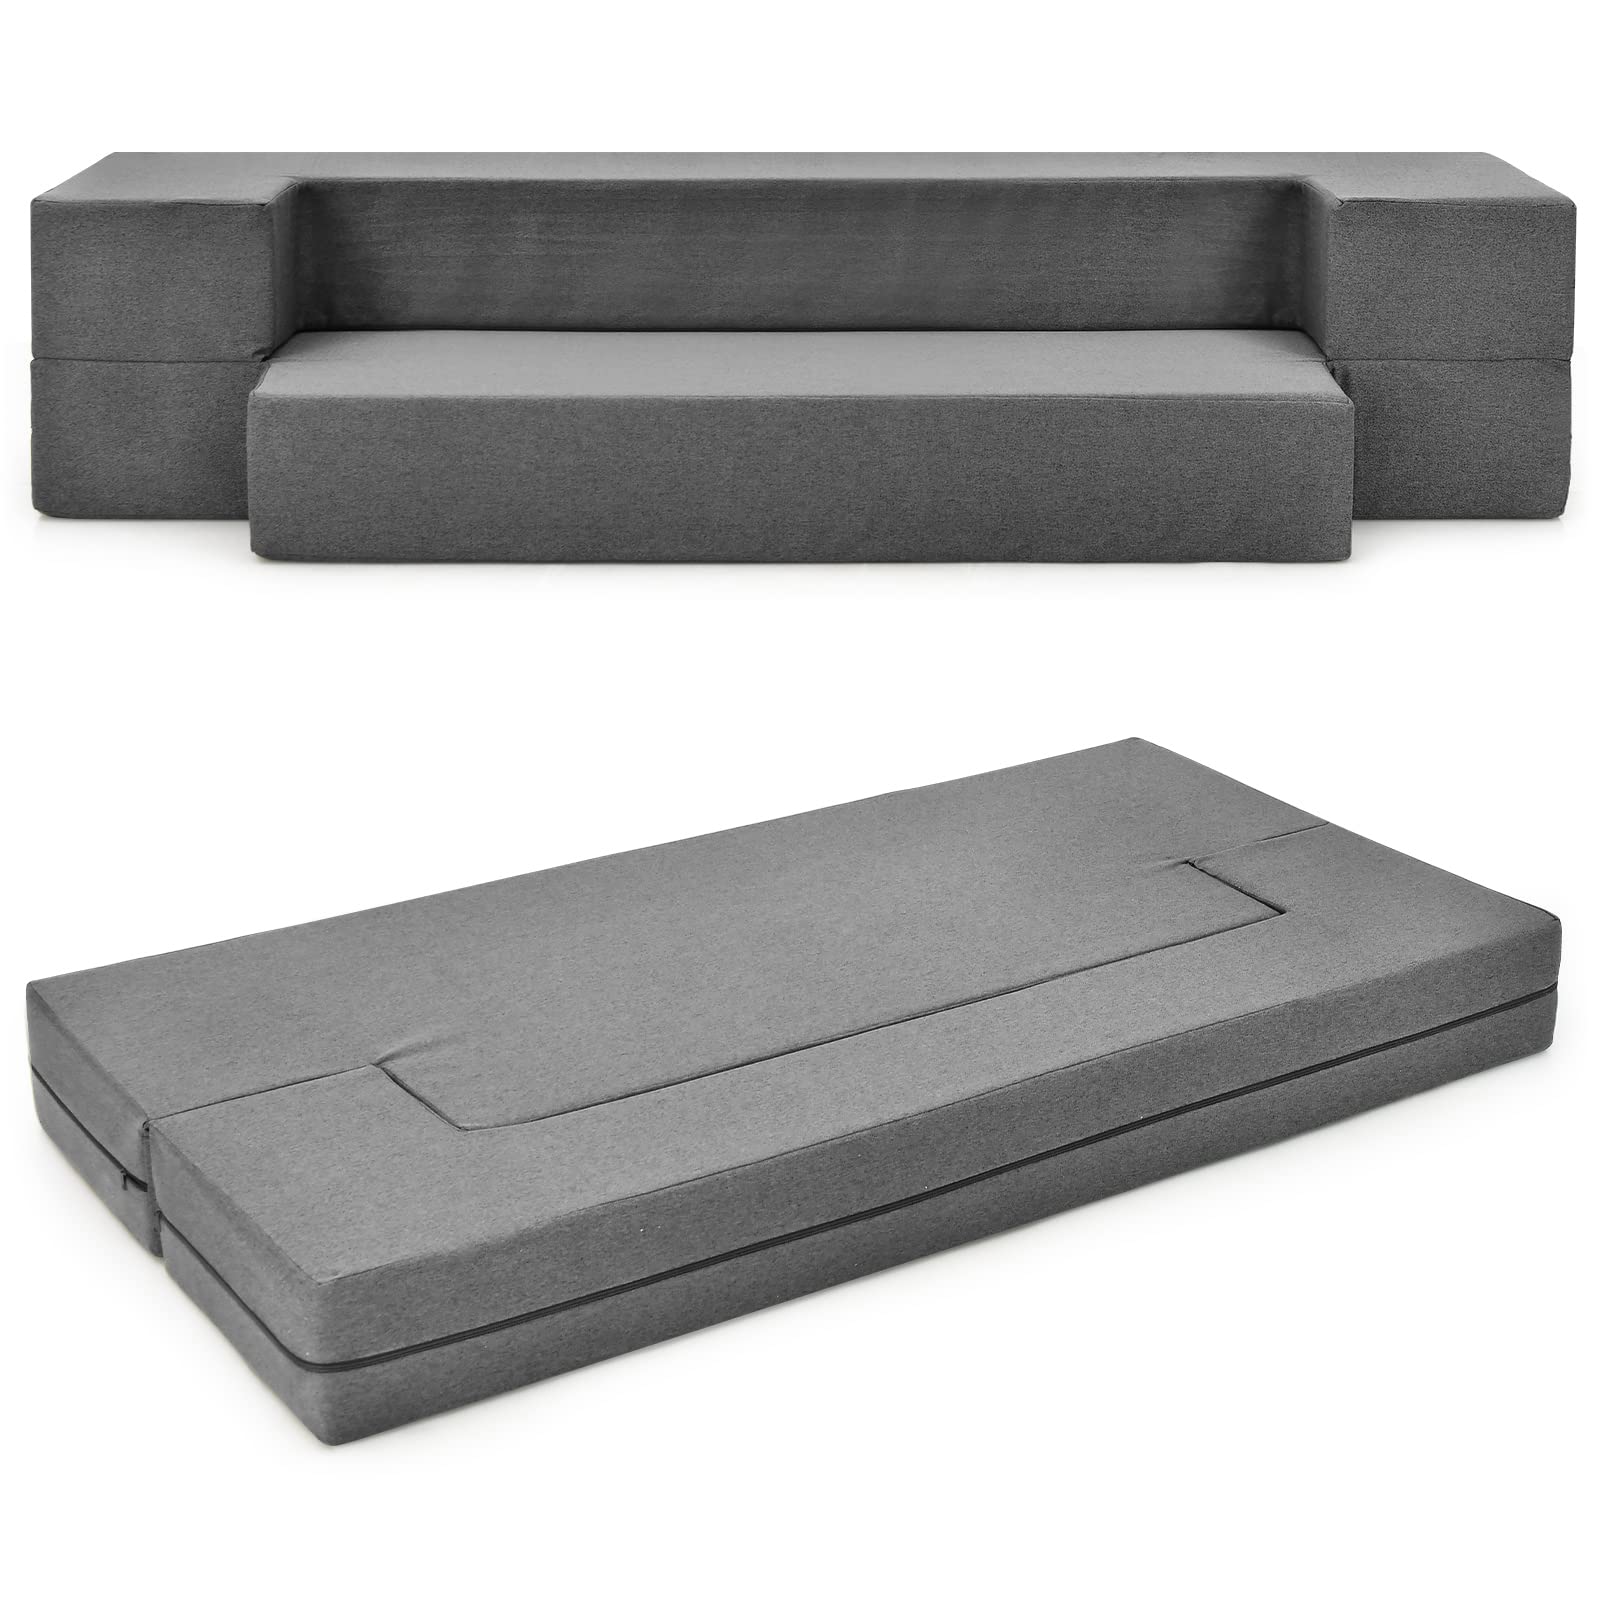 Giantex 8 Inch Folding Sofa Bed Couch